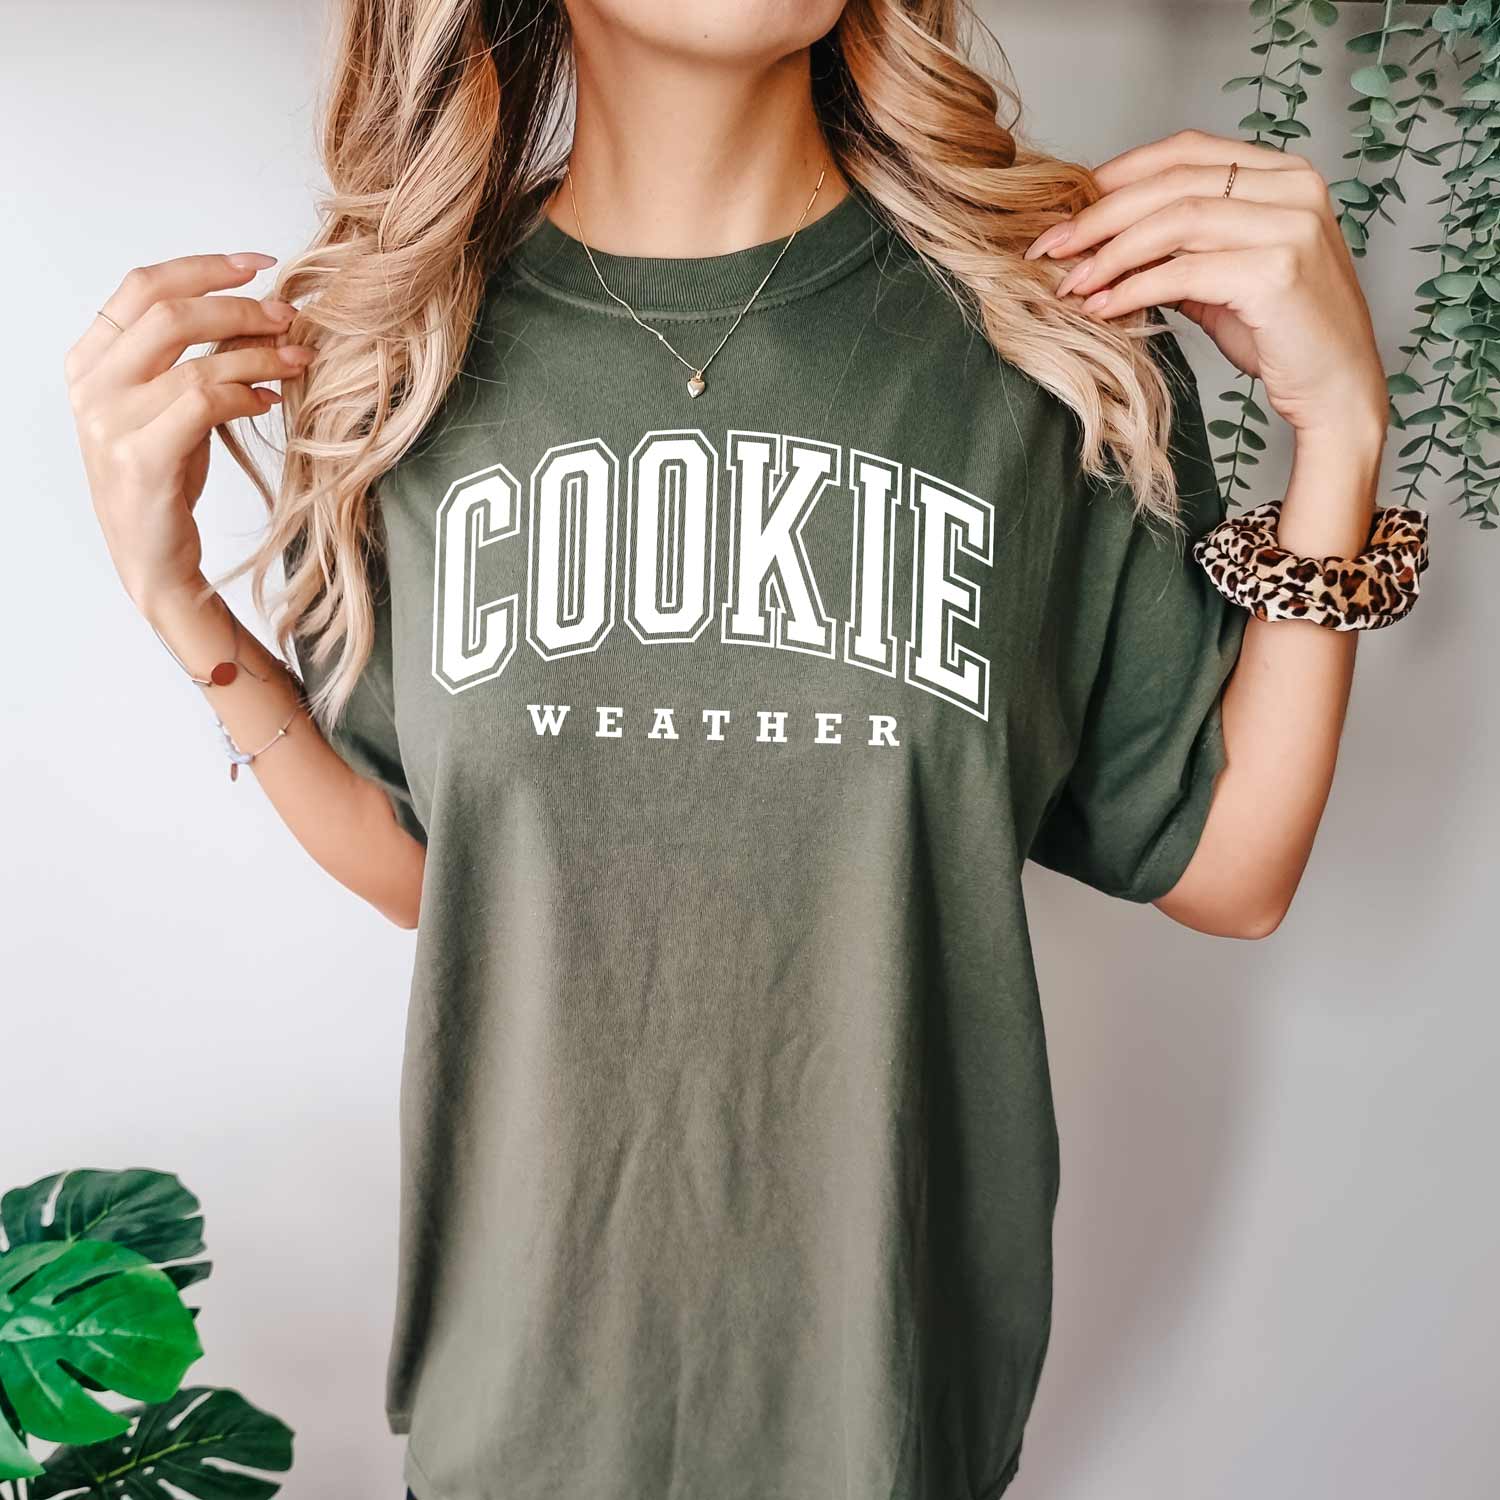 Cookie Weather White Ink Unisex T-Shirt